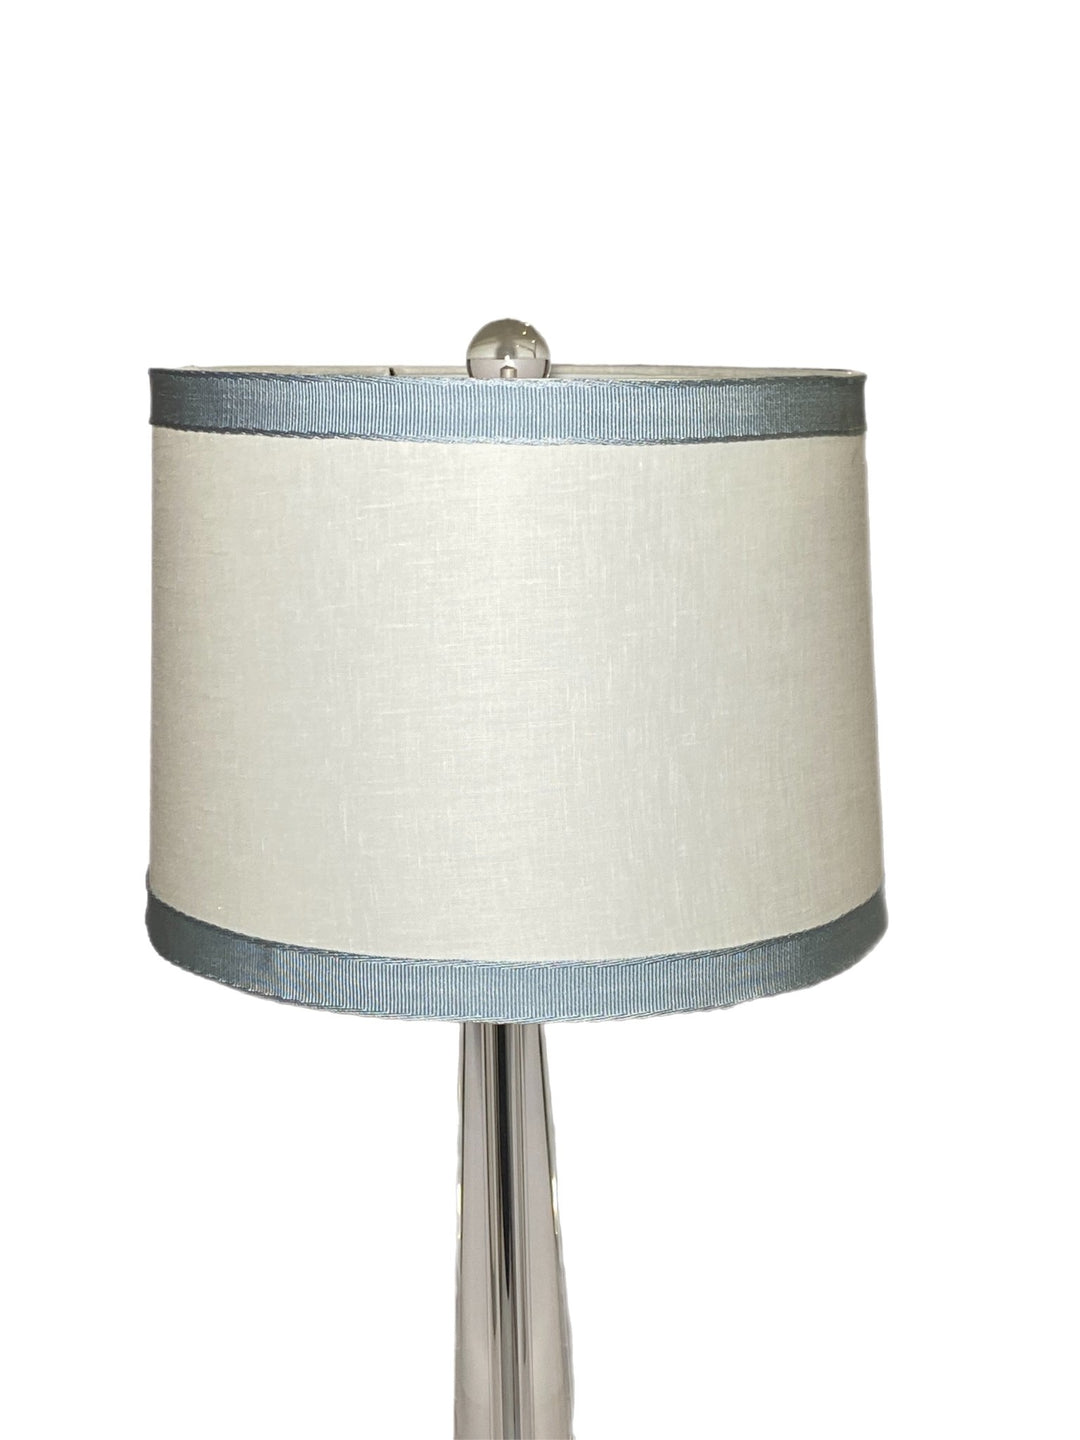 Linen Drum Harback Lamp Shade - Available in Three Sizes + Add Custom Trim - Lux Lamp Shades